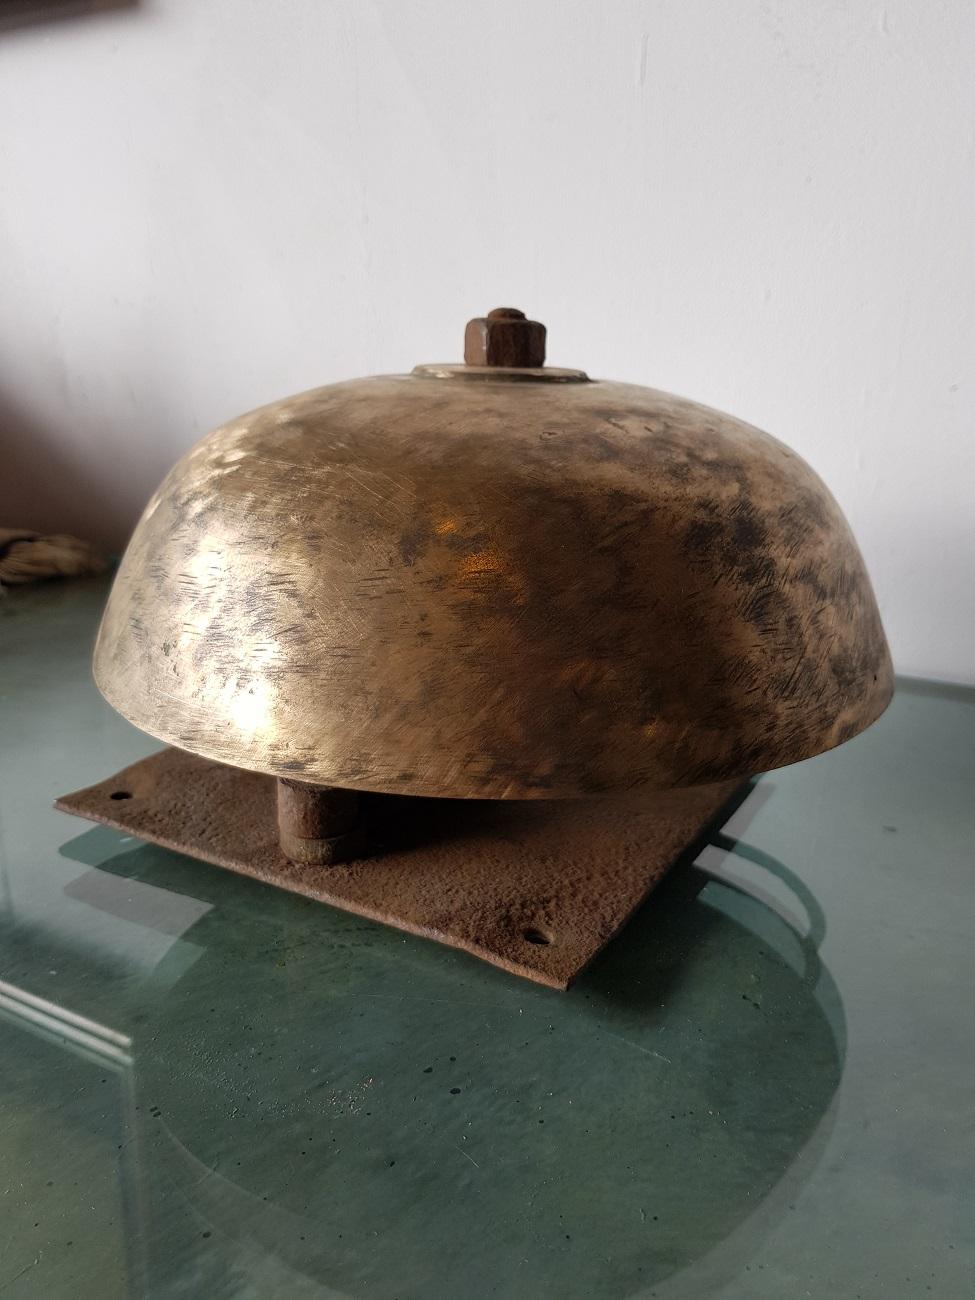 Old French bronze wall bell with working mechanism, first half of the 20th century.

The measurement are:
Depth 23 cm/ 9 inch.
Width 23 cm/ 9 inch.
Height 15 cm/ 5.9 inch.